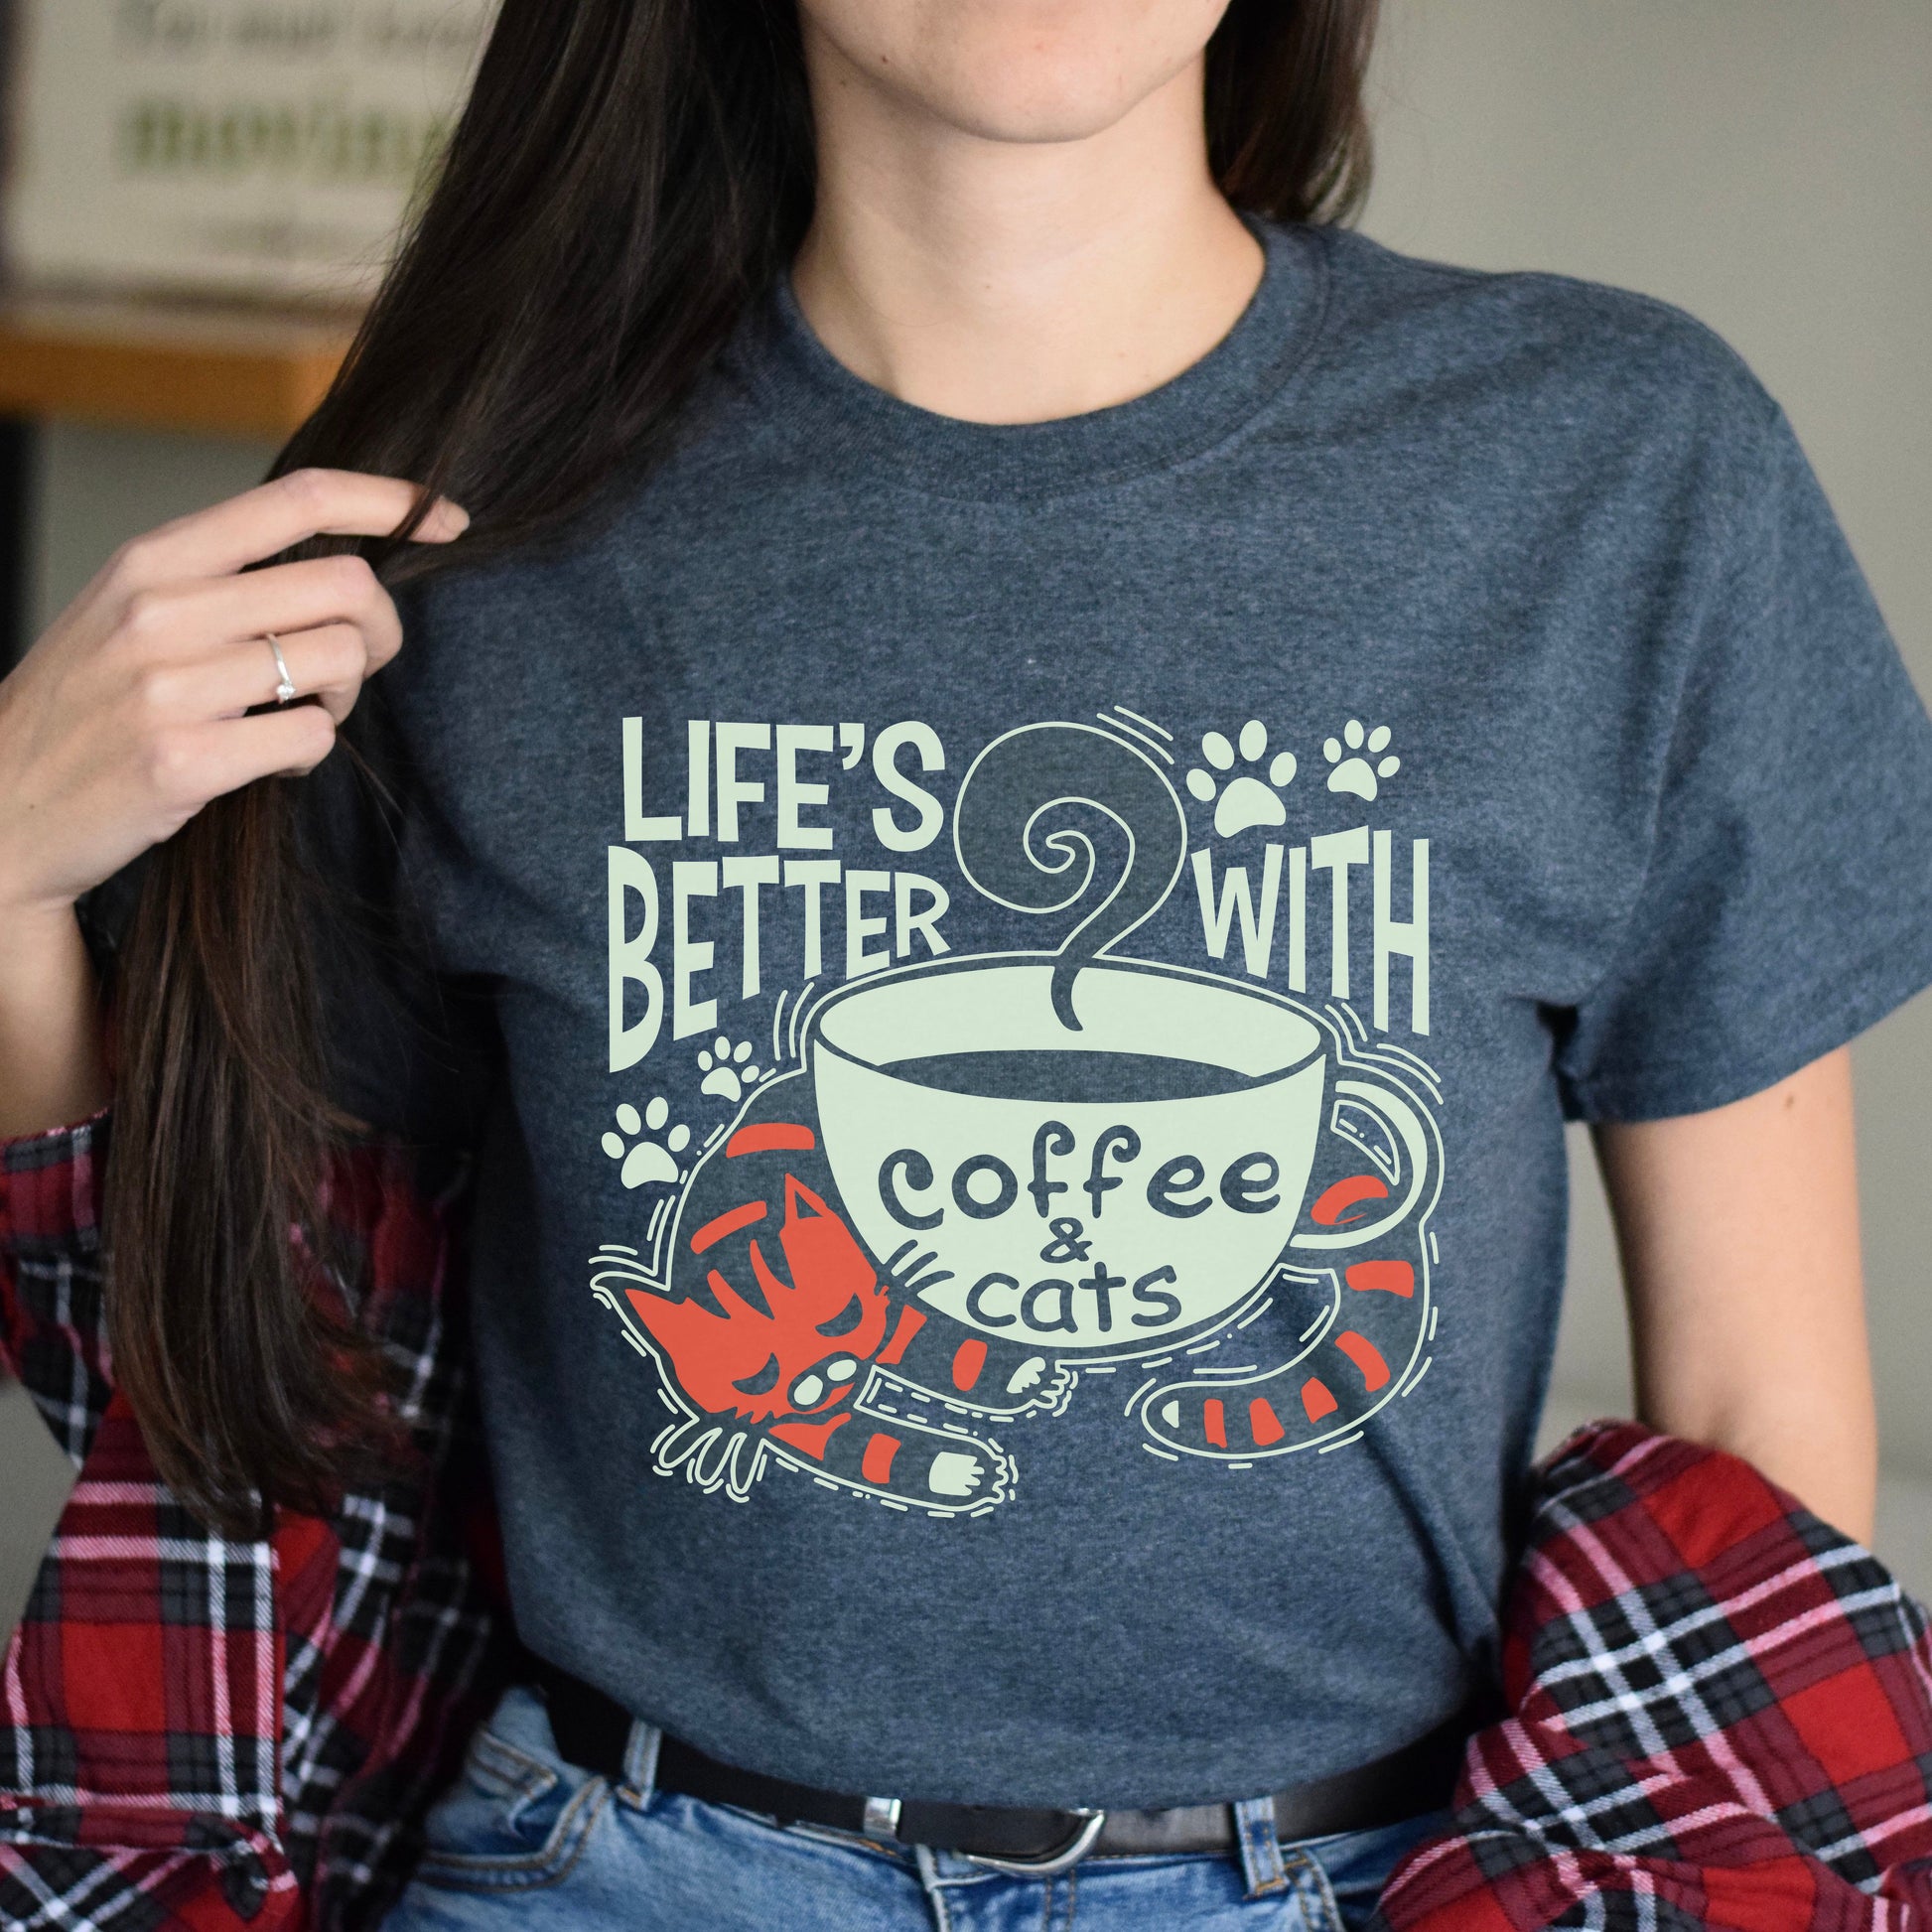 Life is better with coffee and cats Unisex shirt Black Dark Heather-Dark Heather-Family-Gift-Planet